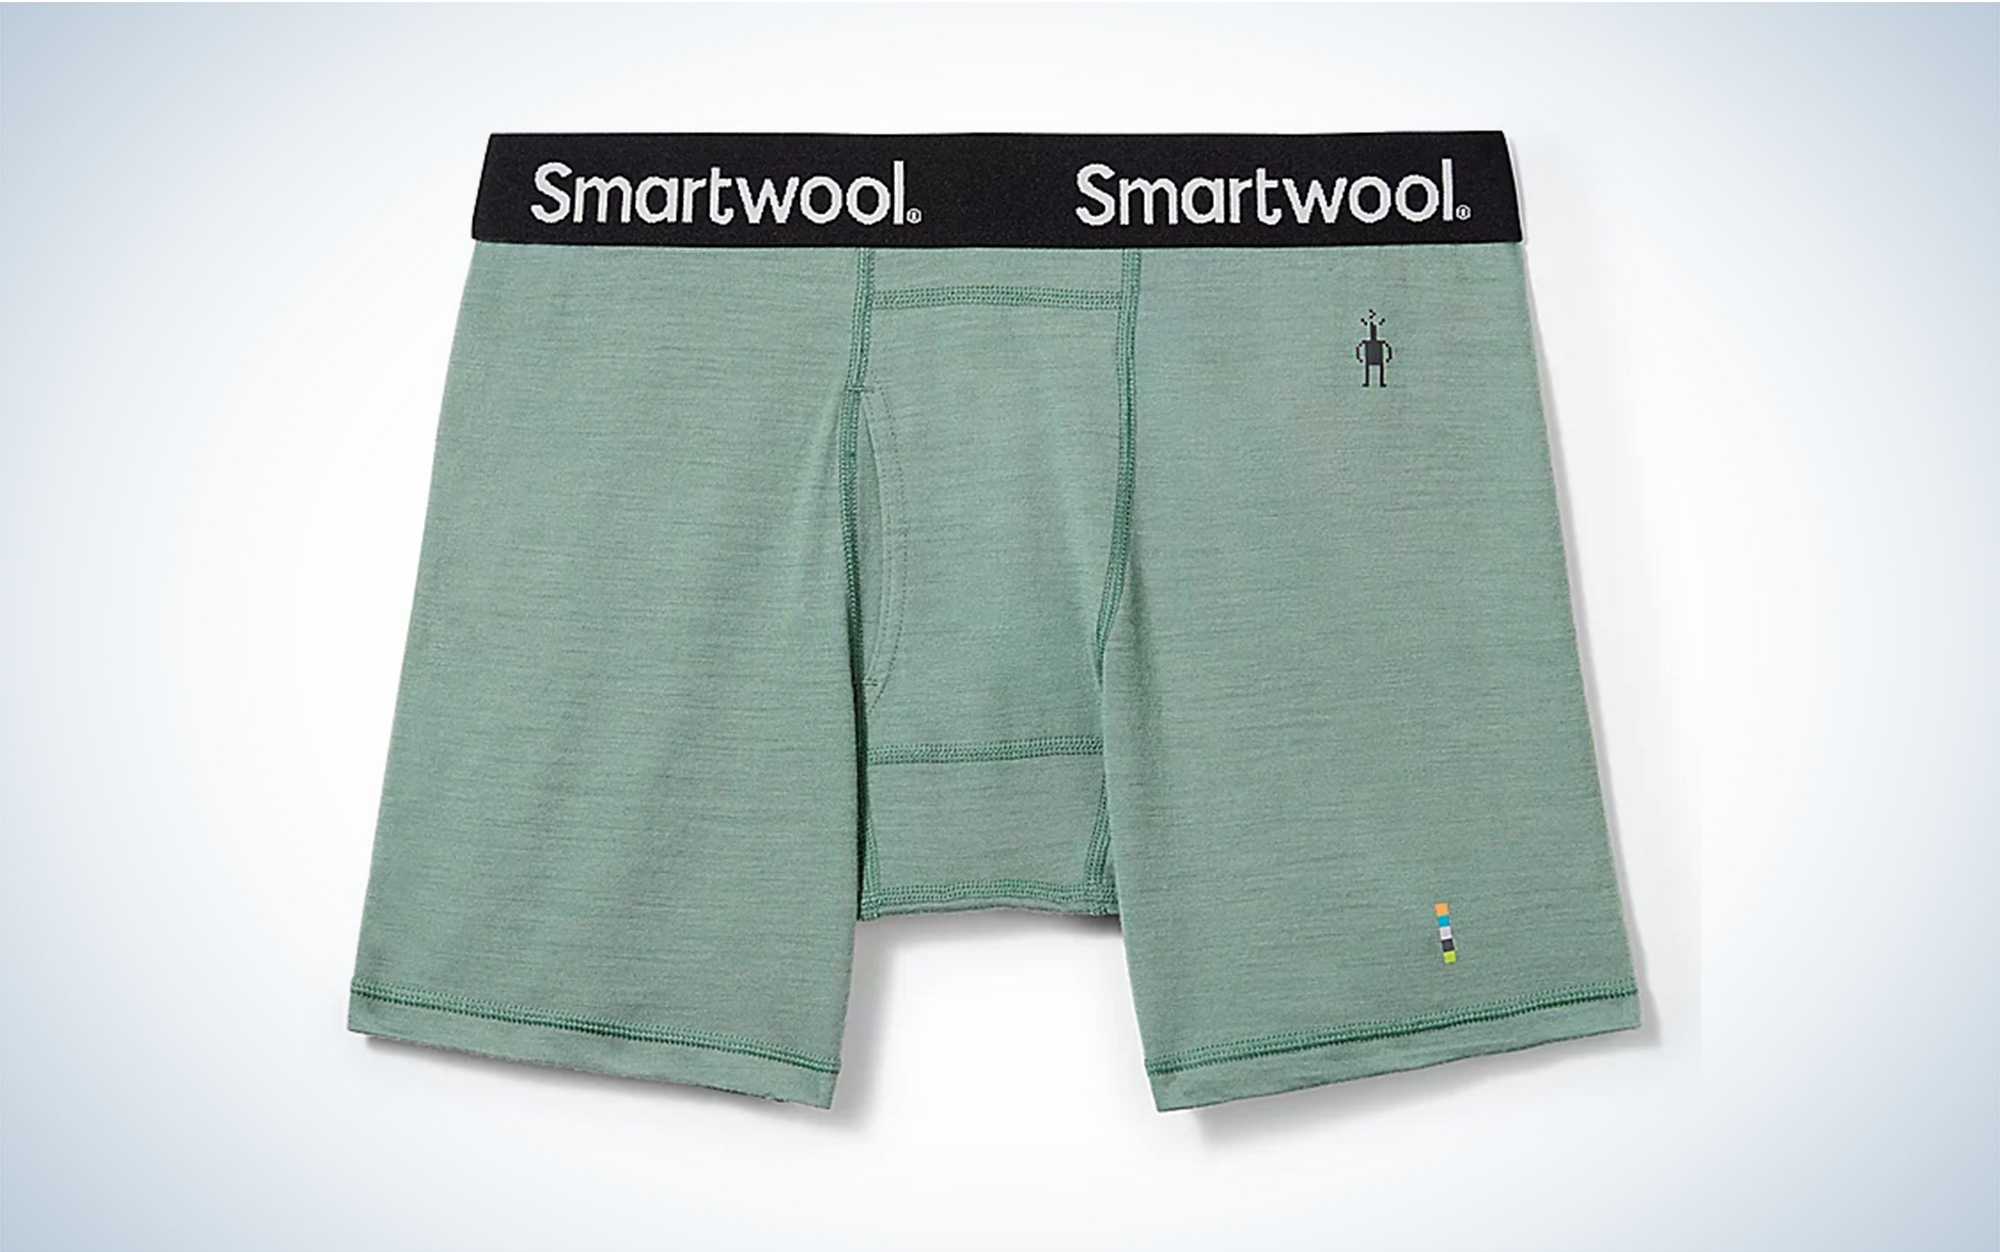 We tested the Smartwool Merino Boxer Brief.